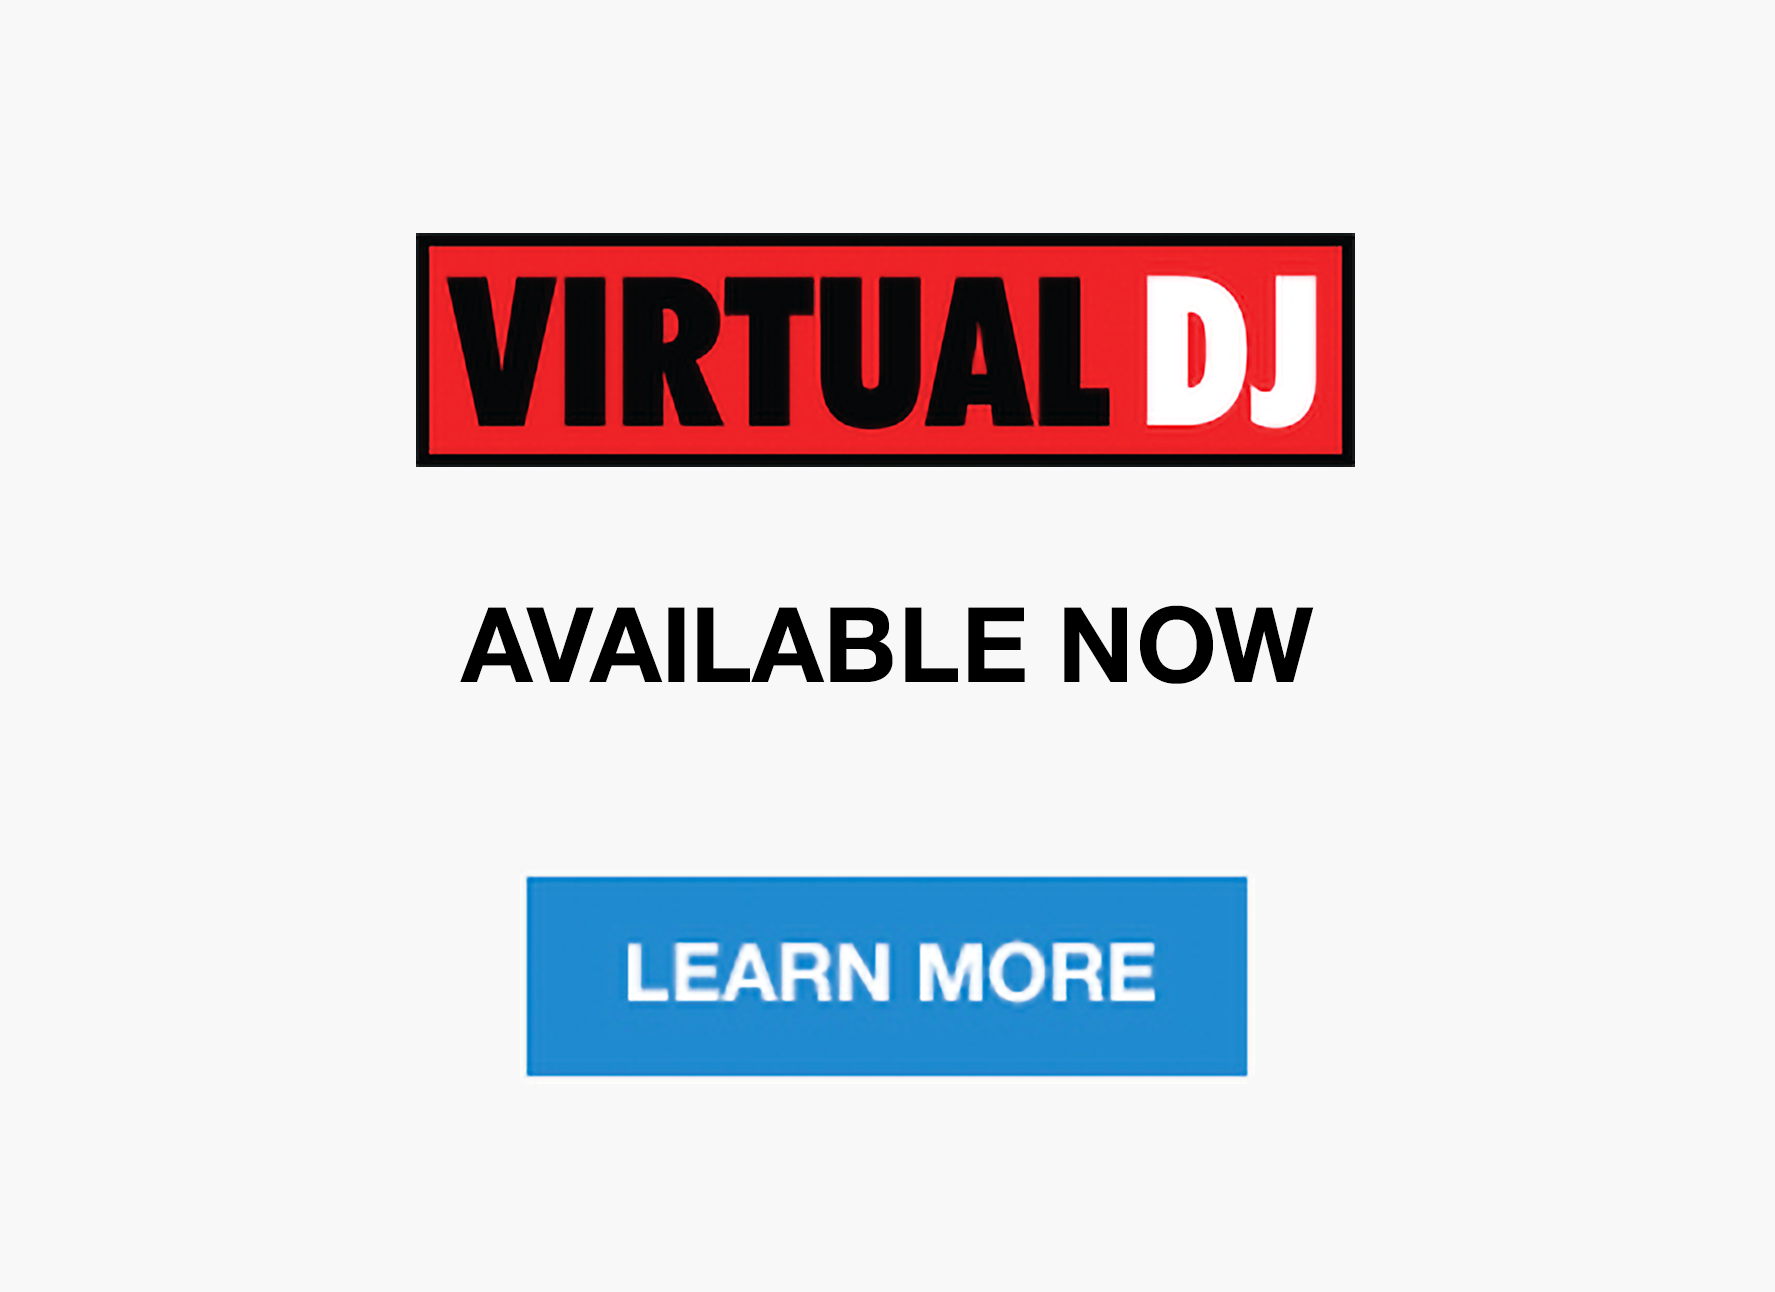 Learn more about Virtual DJ